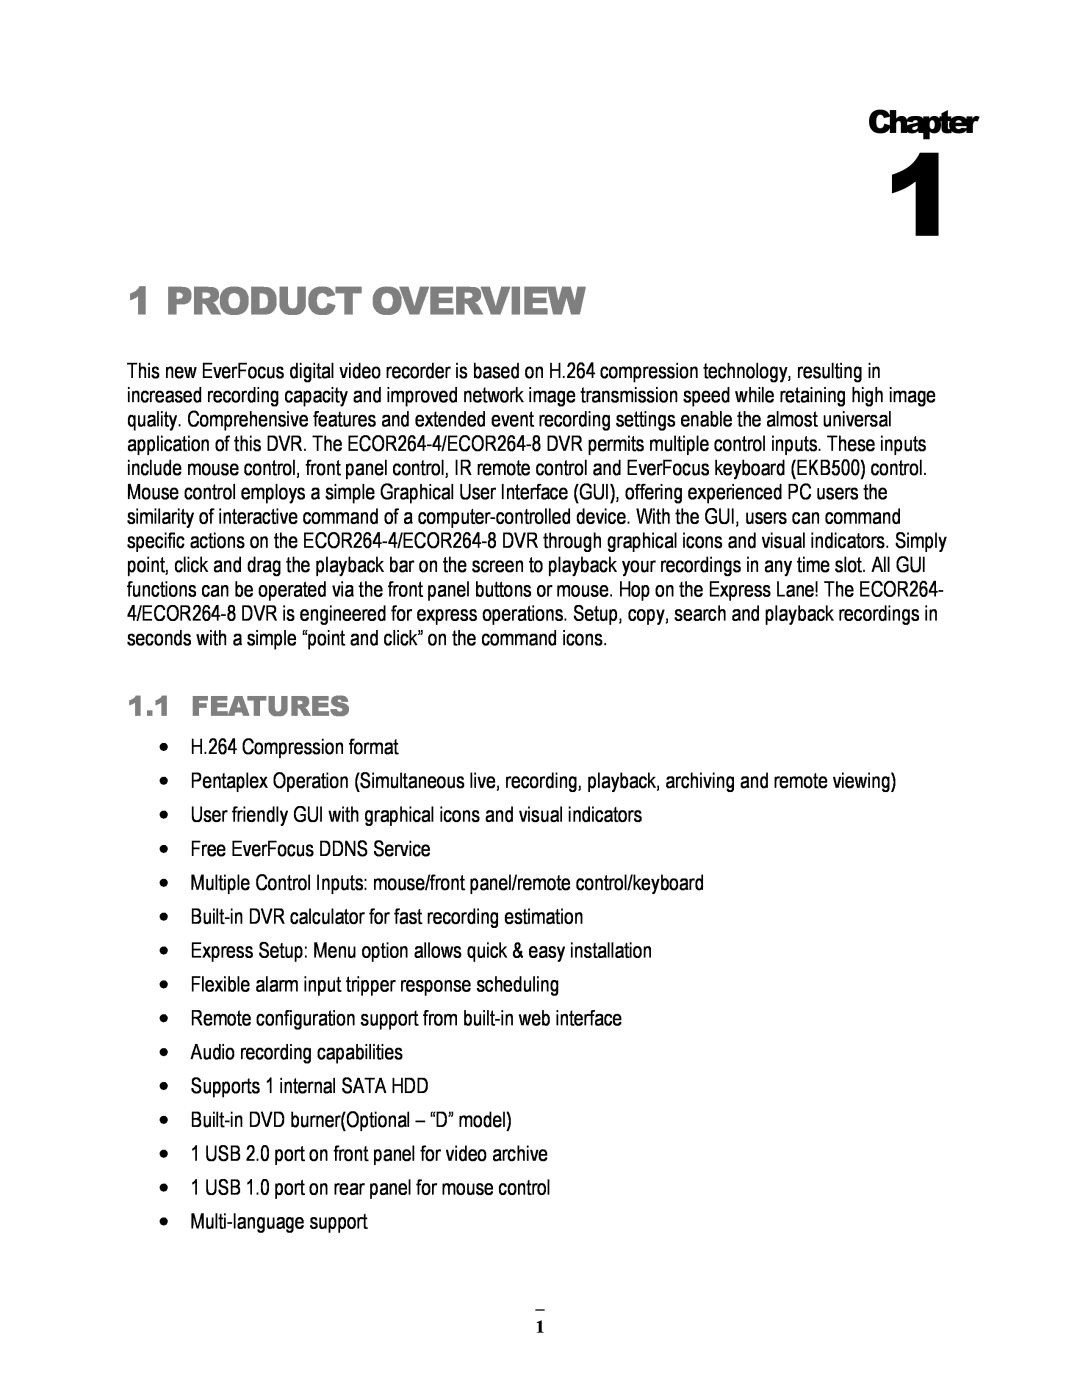 EverFocus ECOR264-8D1, ECOR264-8F1, ECOR264-4D1, ECOR264-4F1 user manual Product Overview, Chapter, Features 